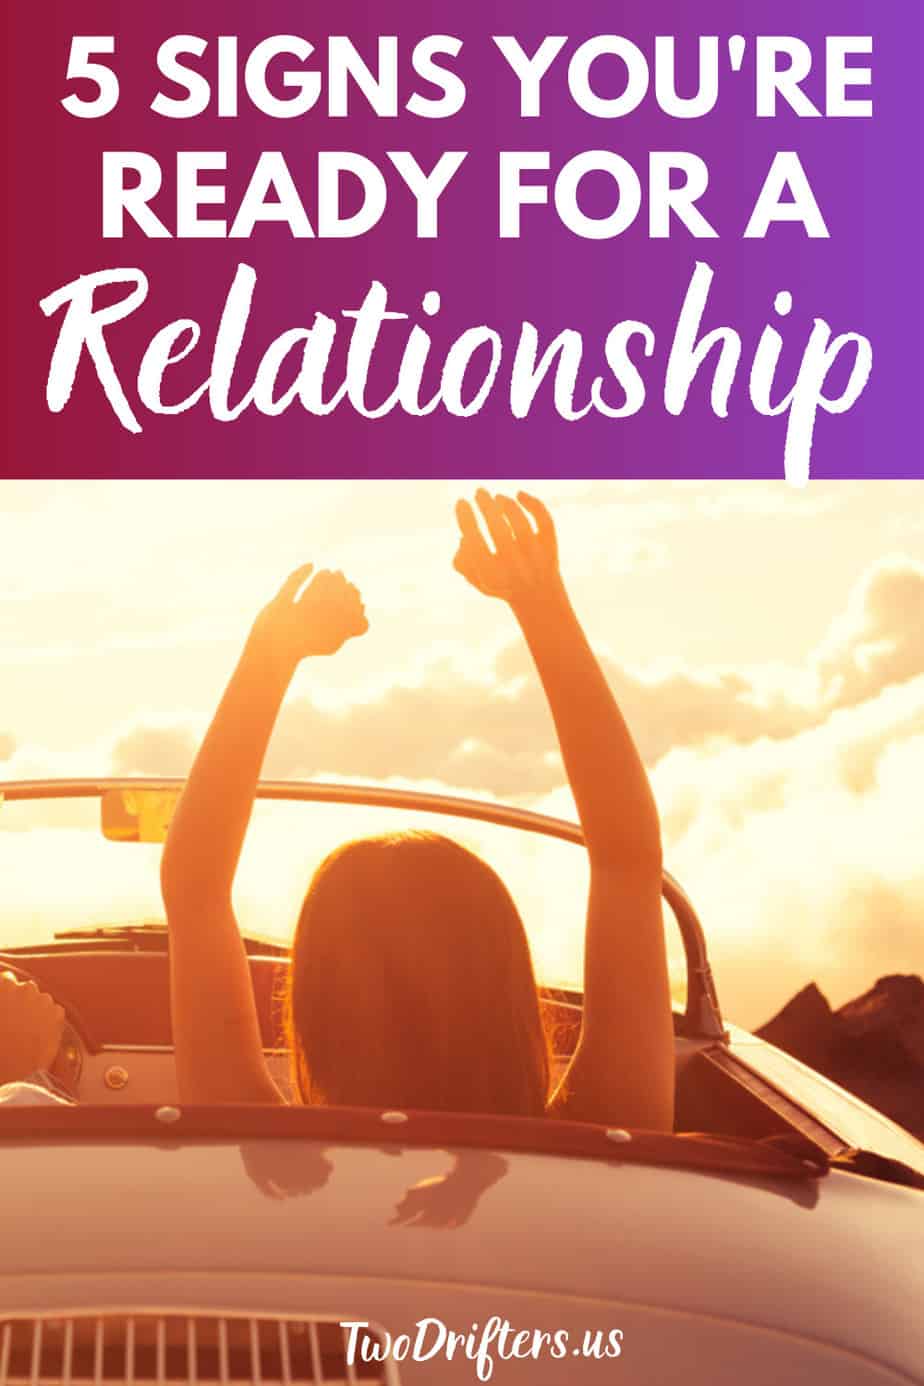 Pinterest social share image that says "5 Signs You're Ready for a Relationship."